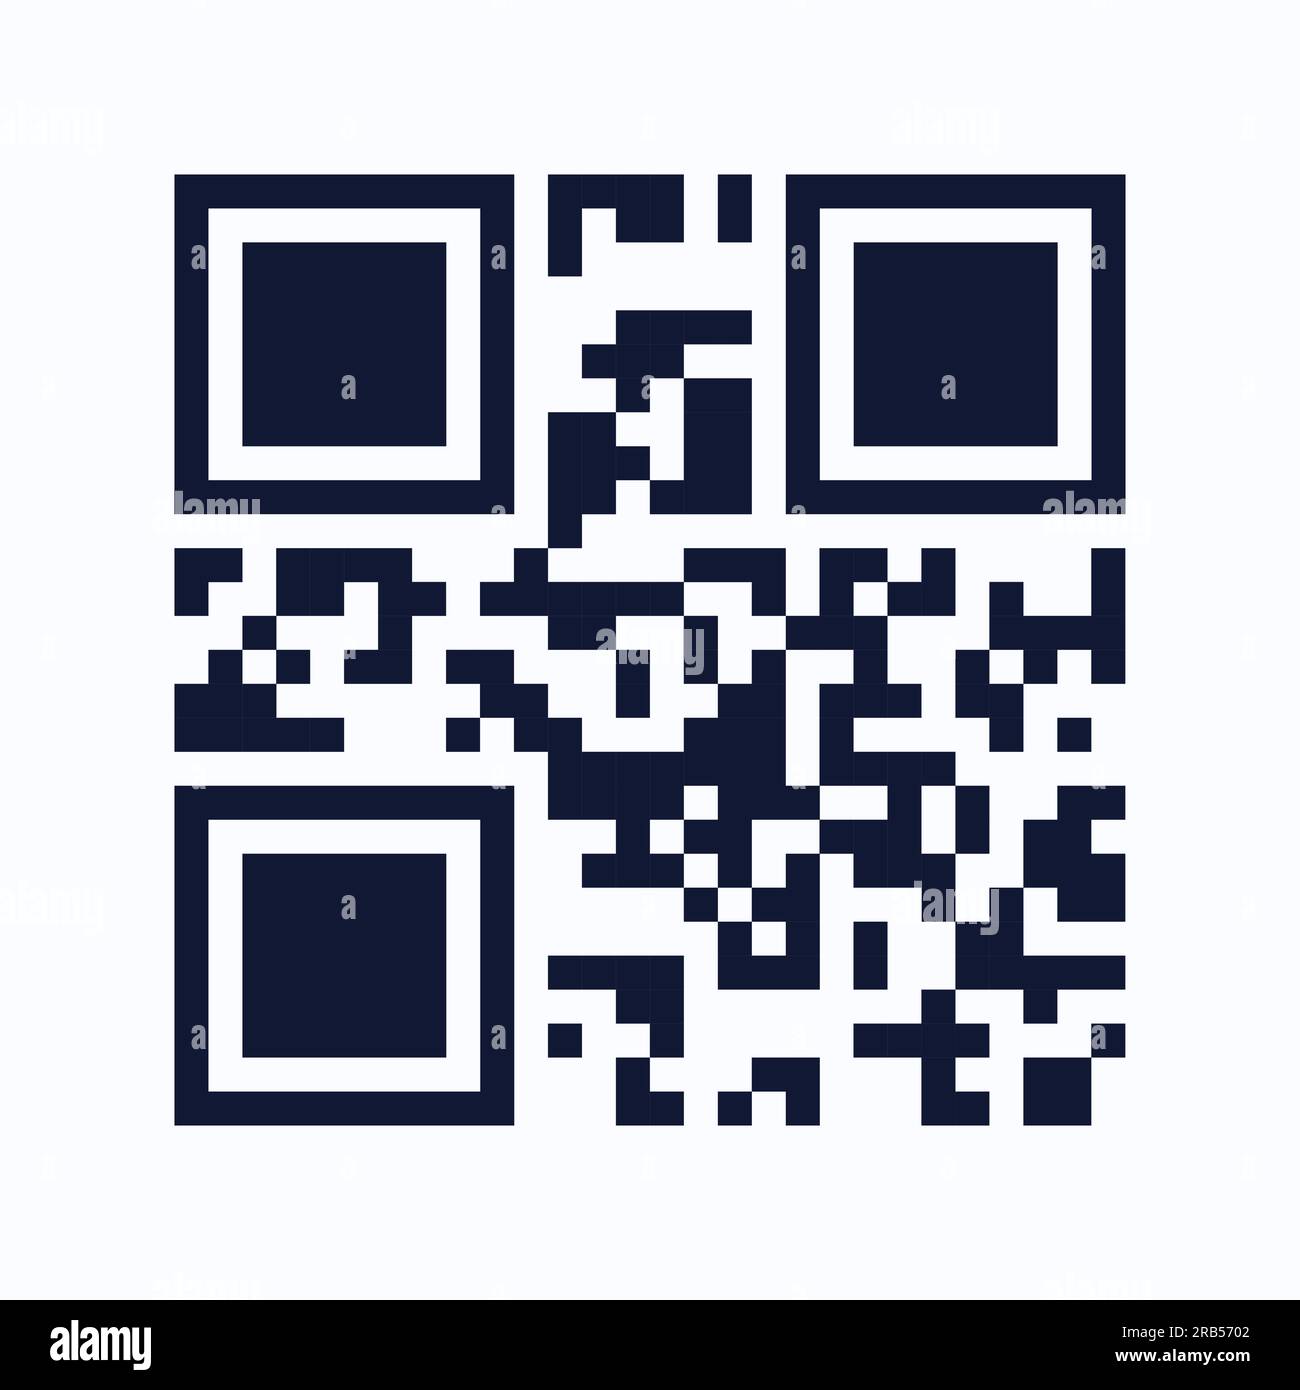 QR code. Quick Response code. Marketing and inventory management